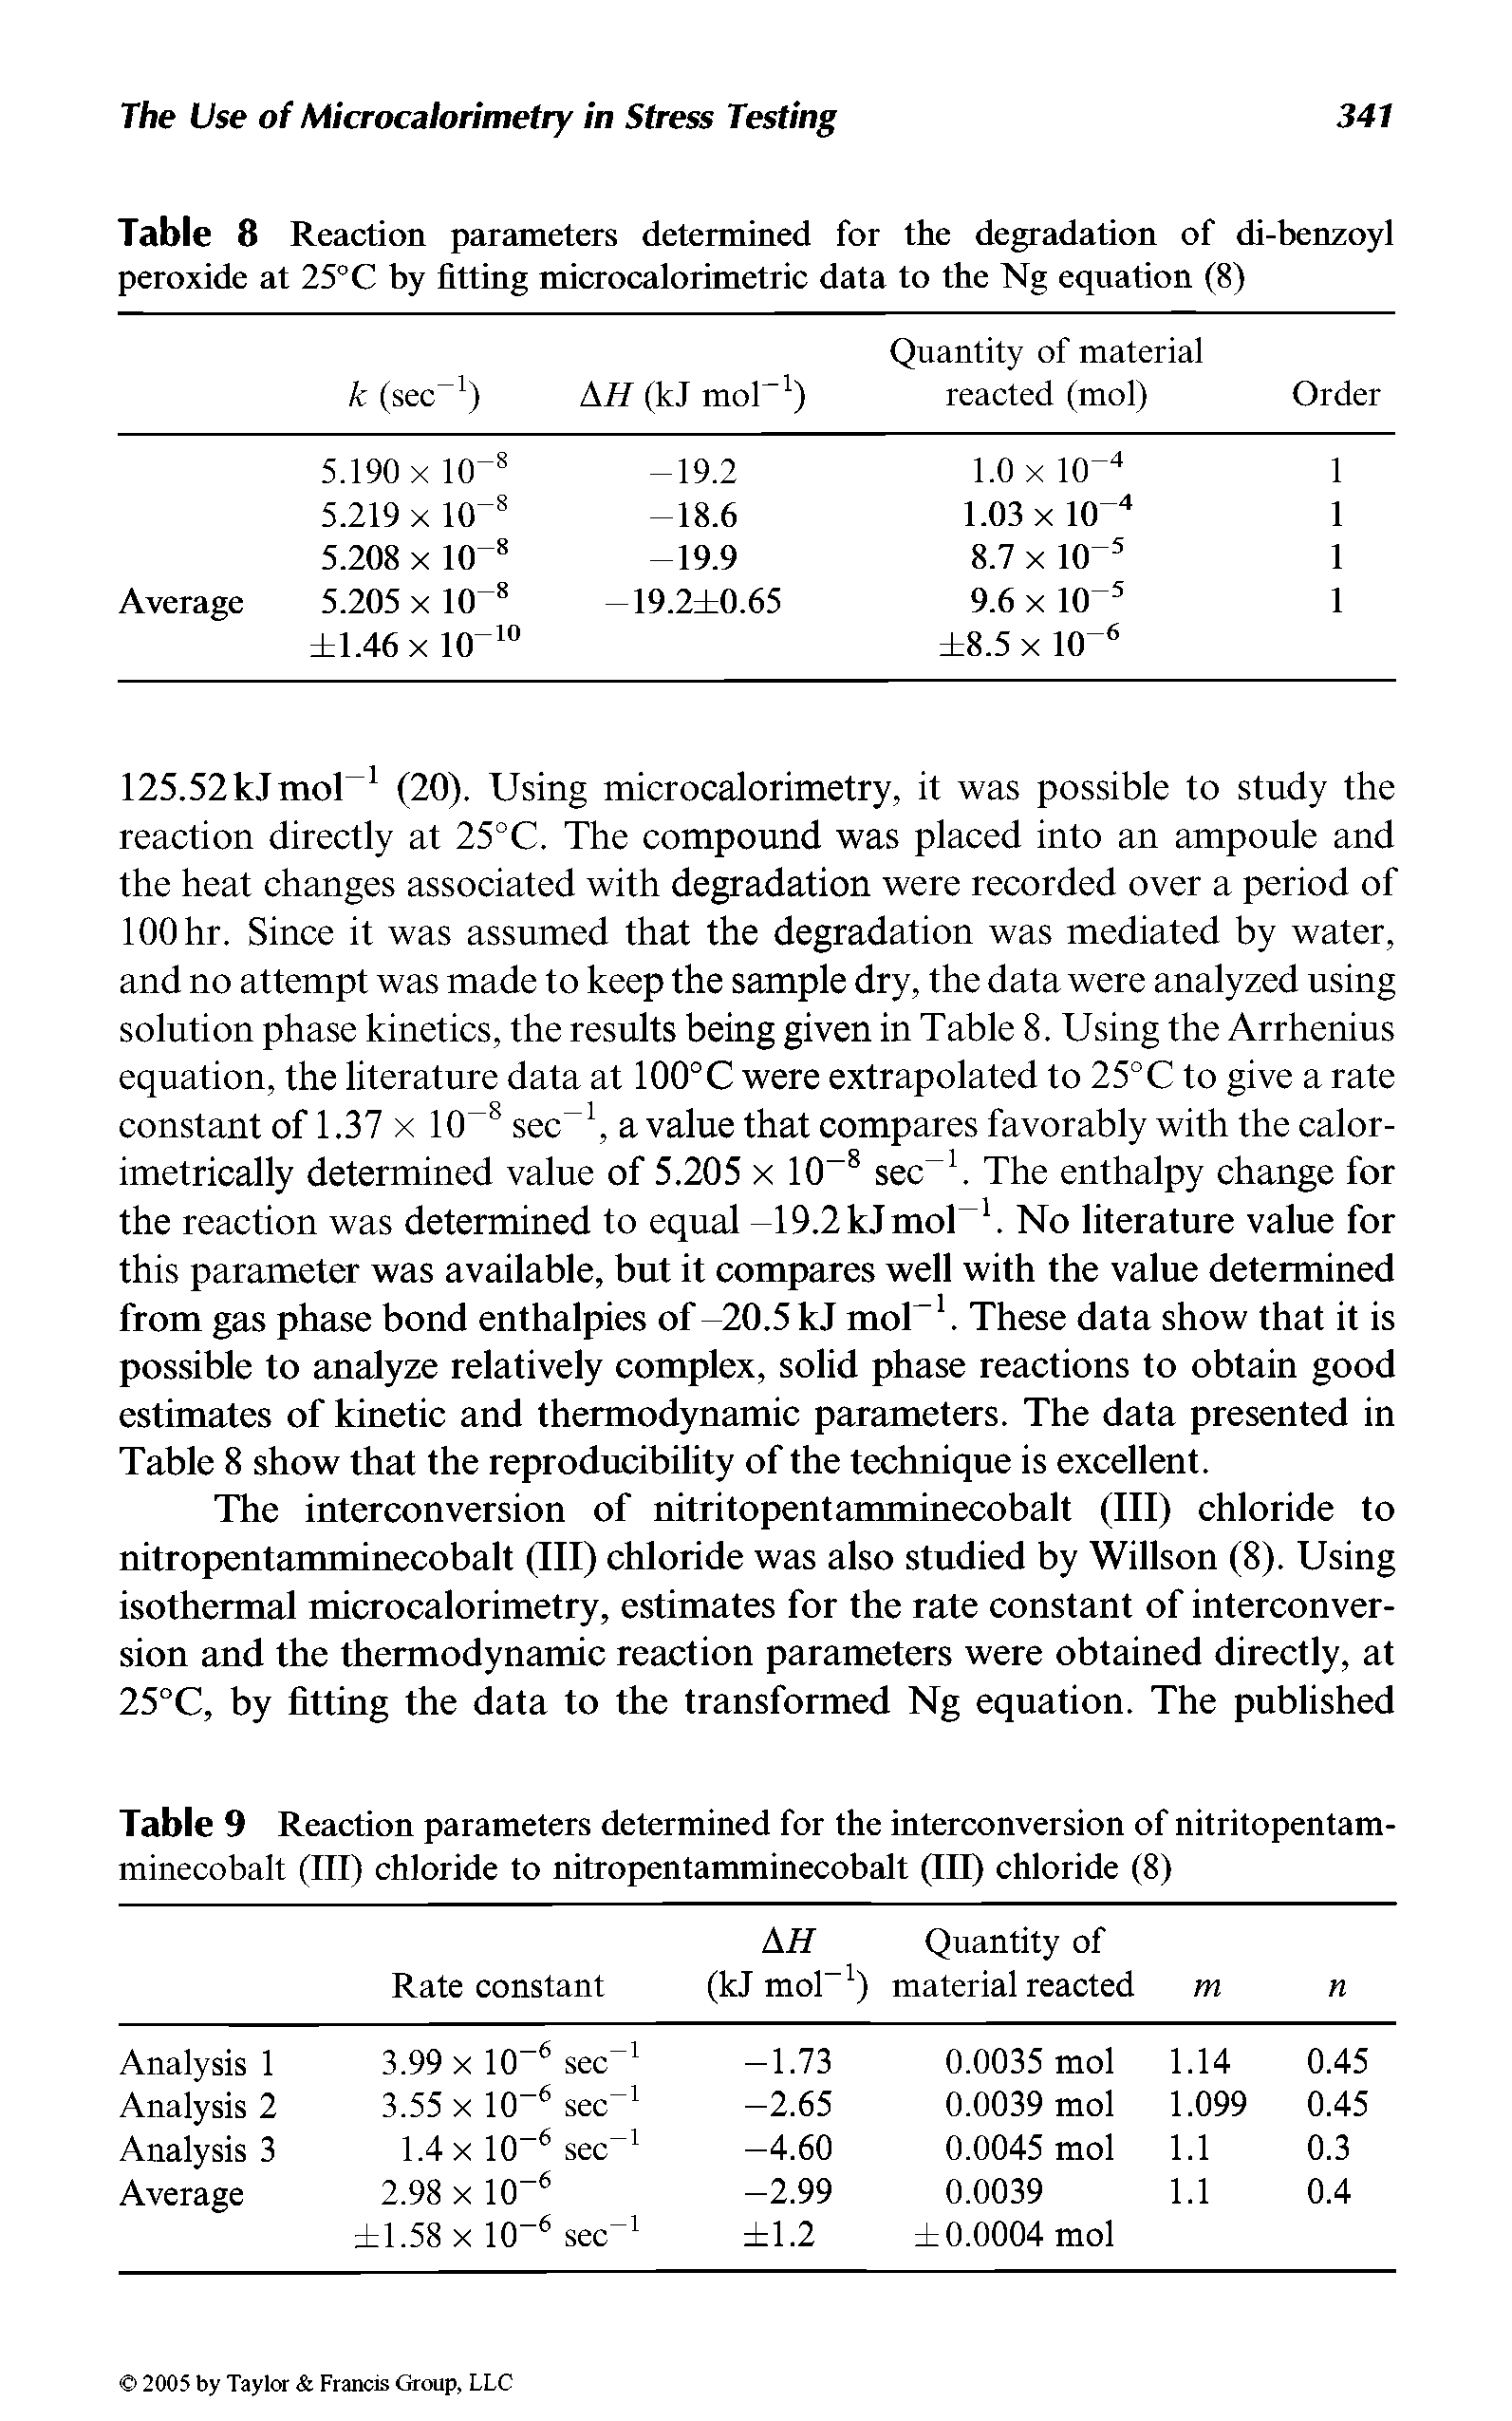 Table 8 Reaction parameters determined for the degradation of di-benzoyl peroxide at 25°C by fitting microcalorimetric data to the Ng equation (8)...